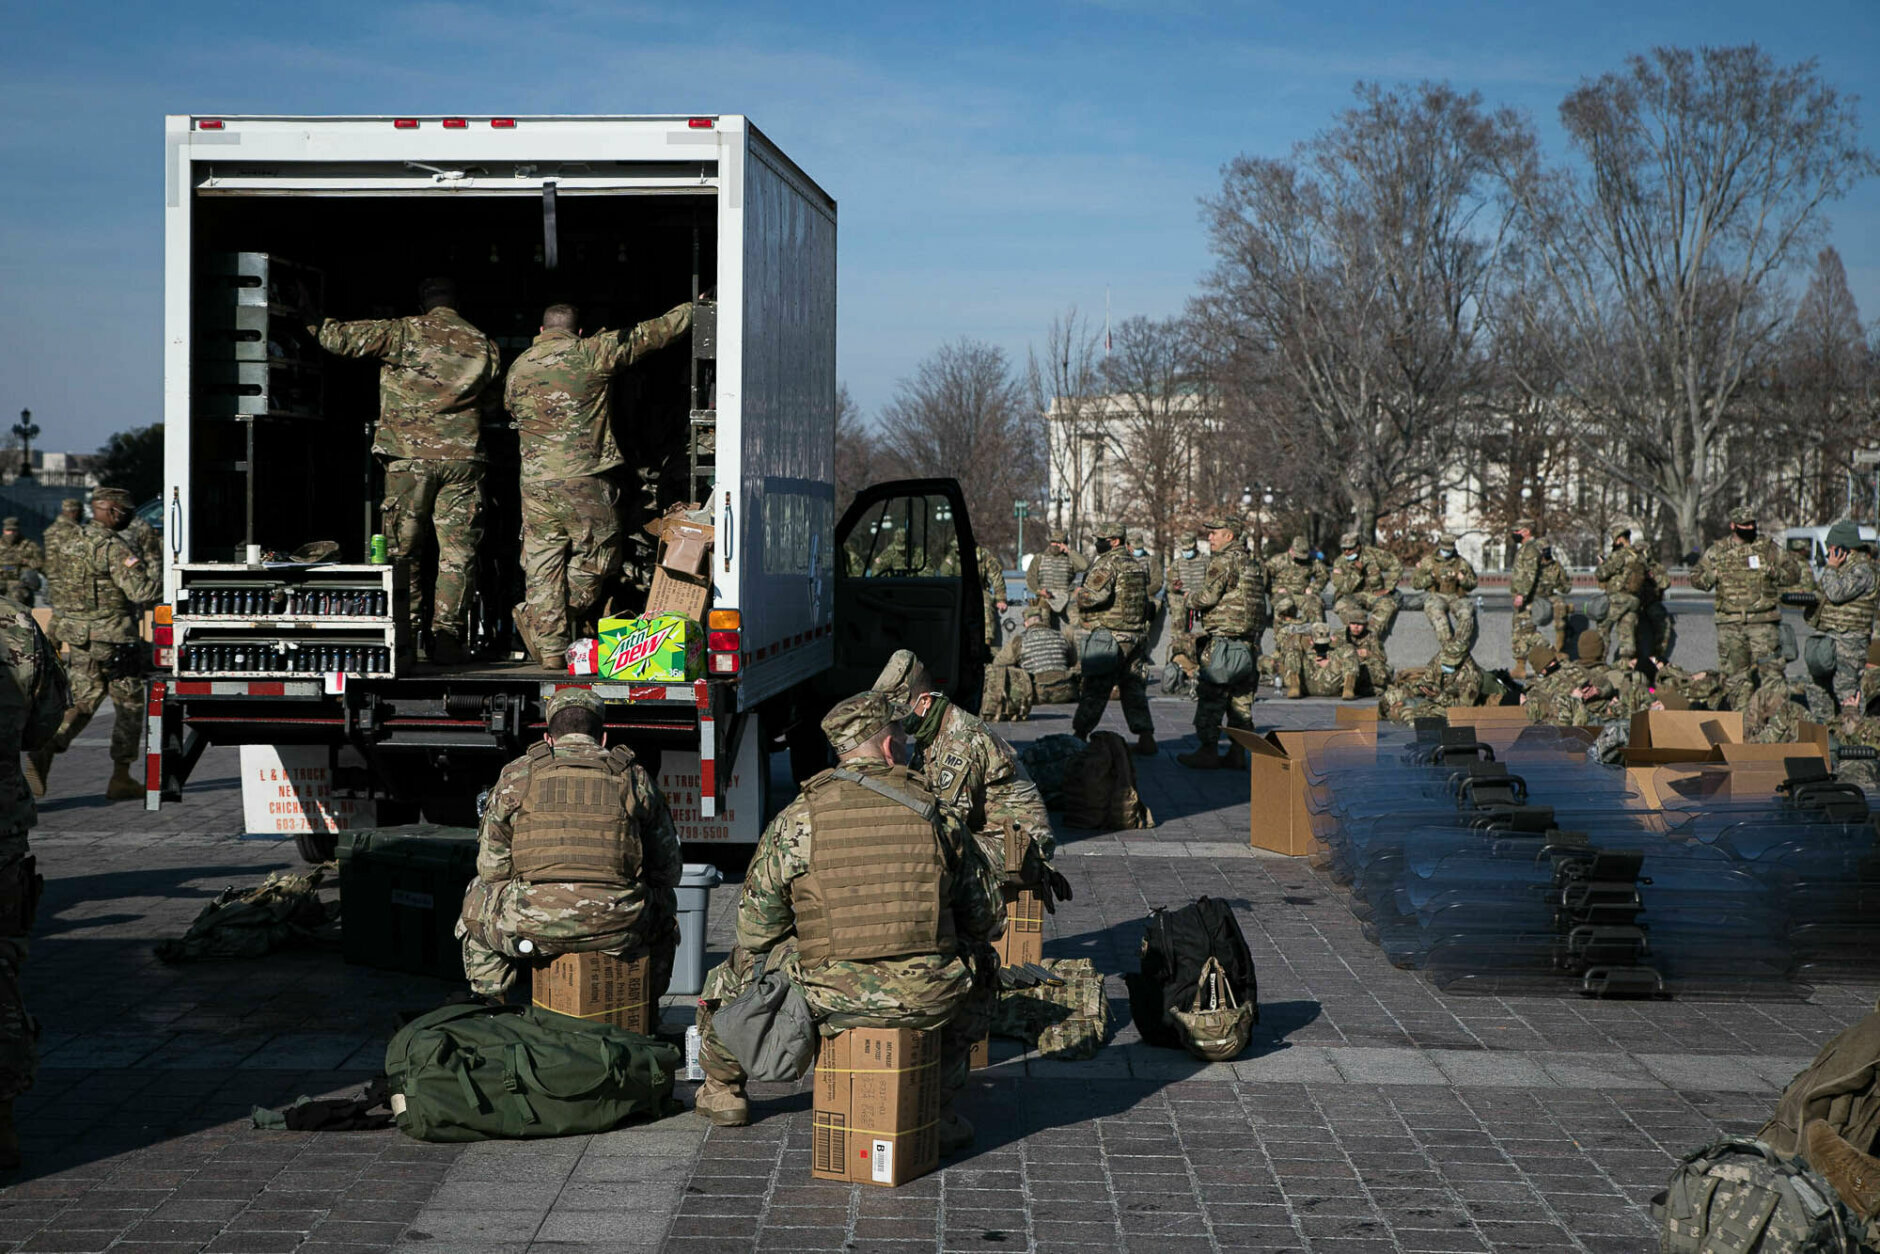 National Guard take a rest beside a stockpile of riot shields outside the U.S. Capitol building on Jan. 13, 2021. More than 20,000 armed guardsmen are expected to provide security in the nation's capital amid threats against the inauguration of President-elect Joe Biden. (WTOP/Alejandro Alvarez)